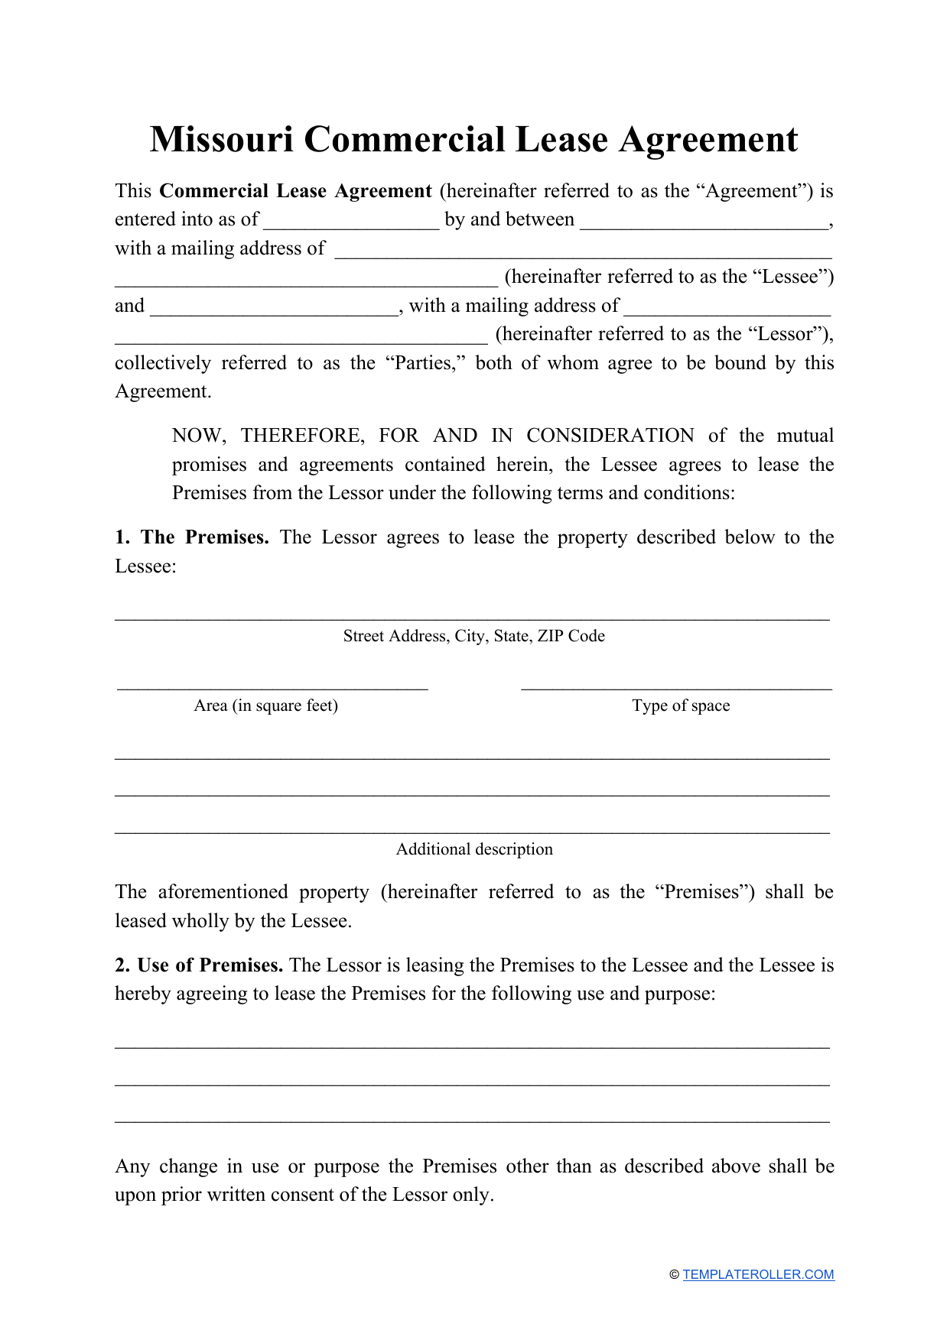 Commercial Lease Agreement Template - Missouri, Page 1